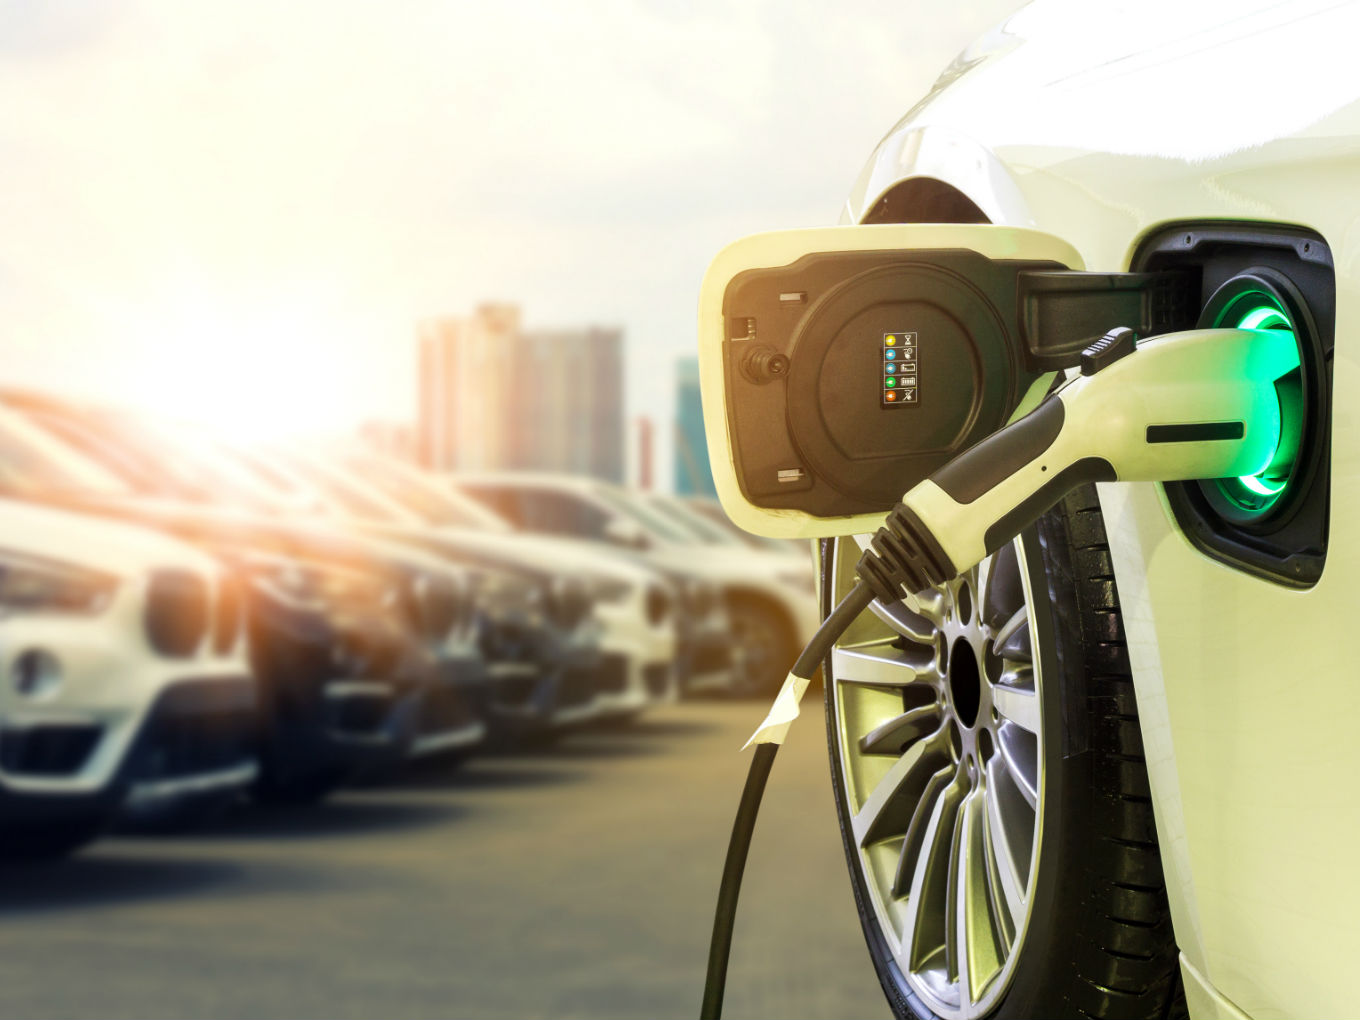 Govt Lists Out EV Components To Be Produced Locally For Claiming FAME II Benefits